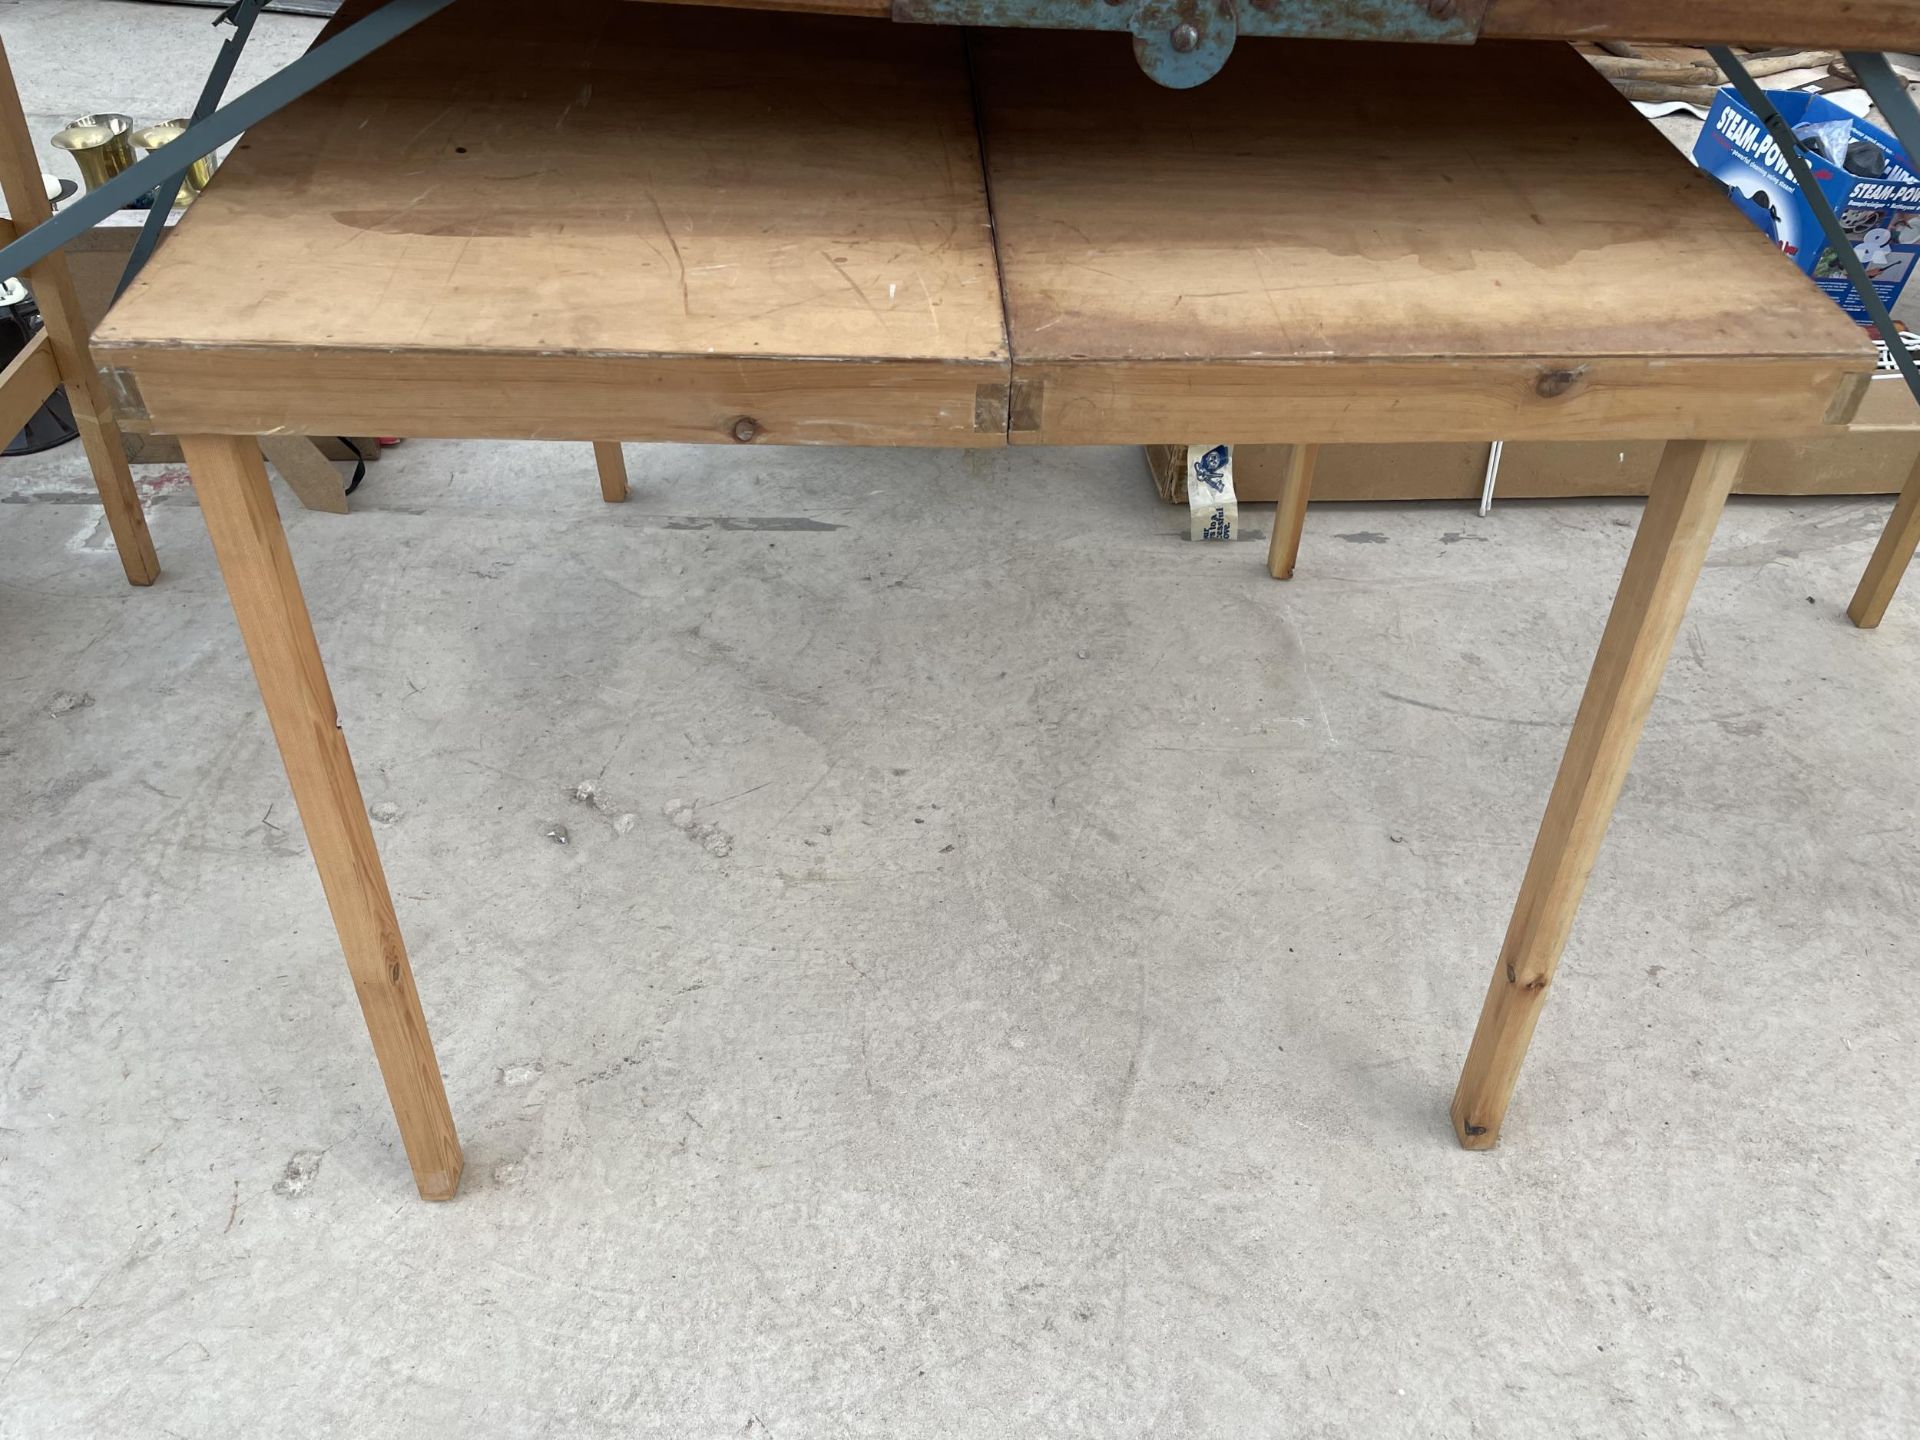 TWO FOLDING WOODEN PASTING TABLES - Image 2 of 2